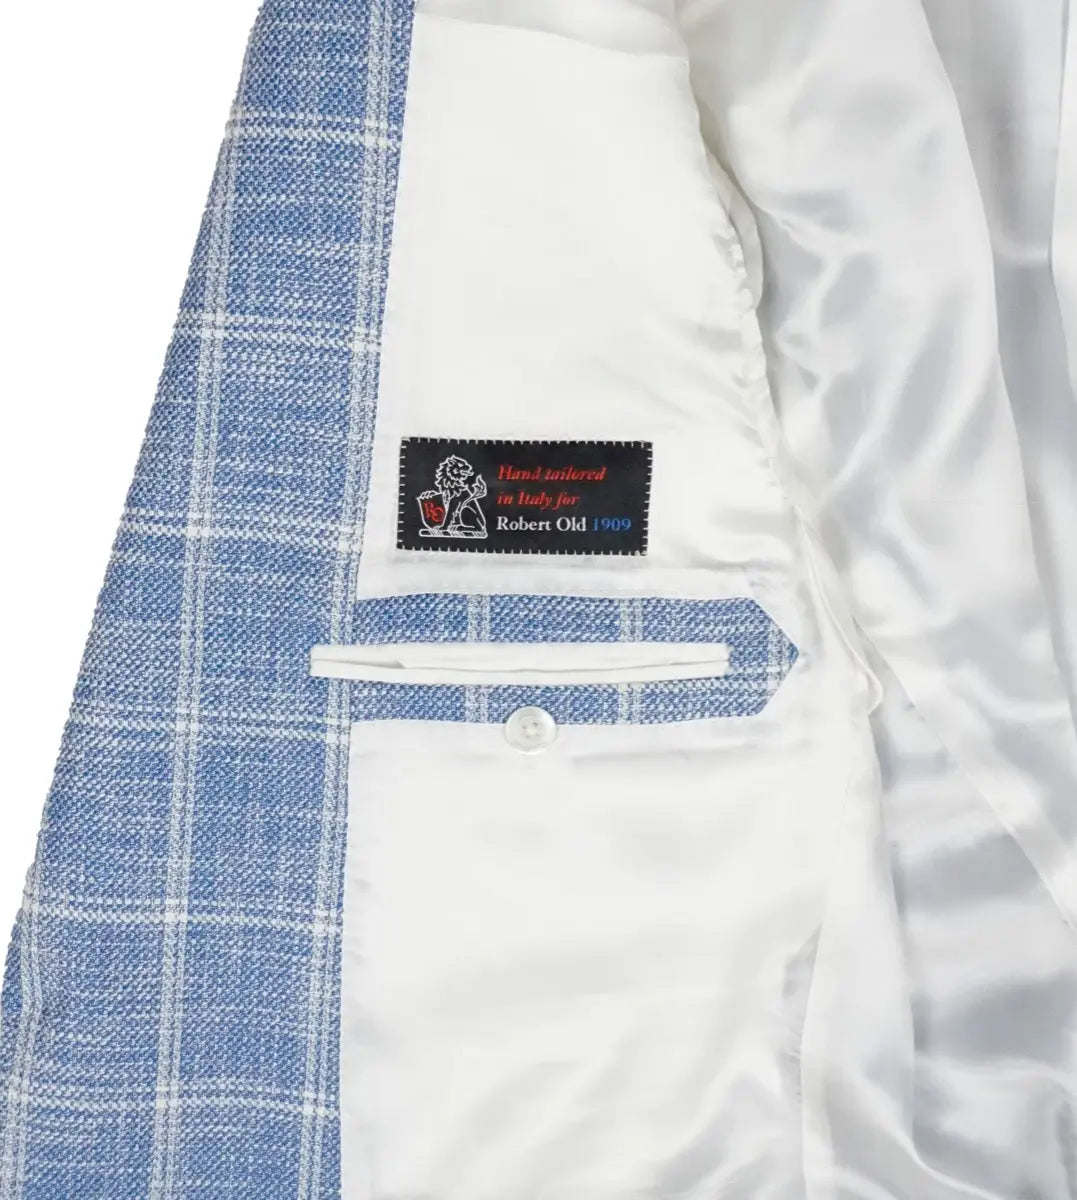 Blue & White Checked Cotton, Linen & Wool Jacket  Robert Old   